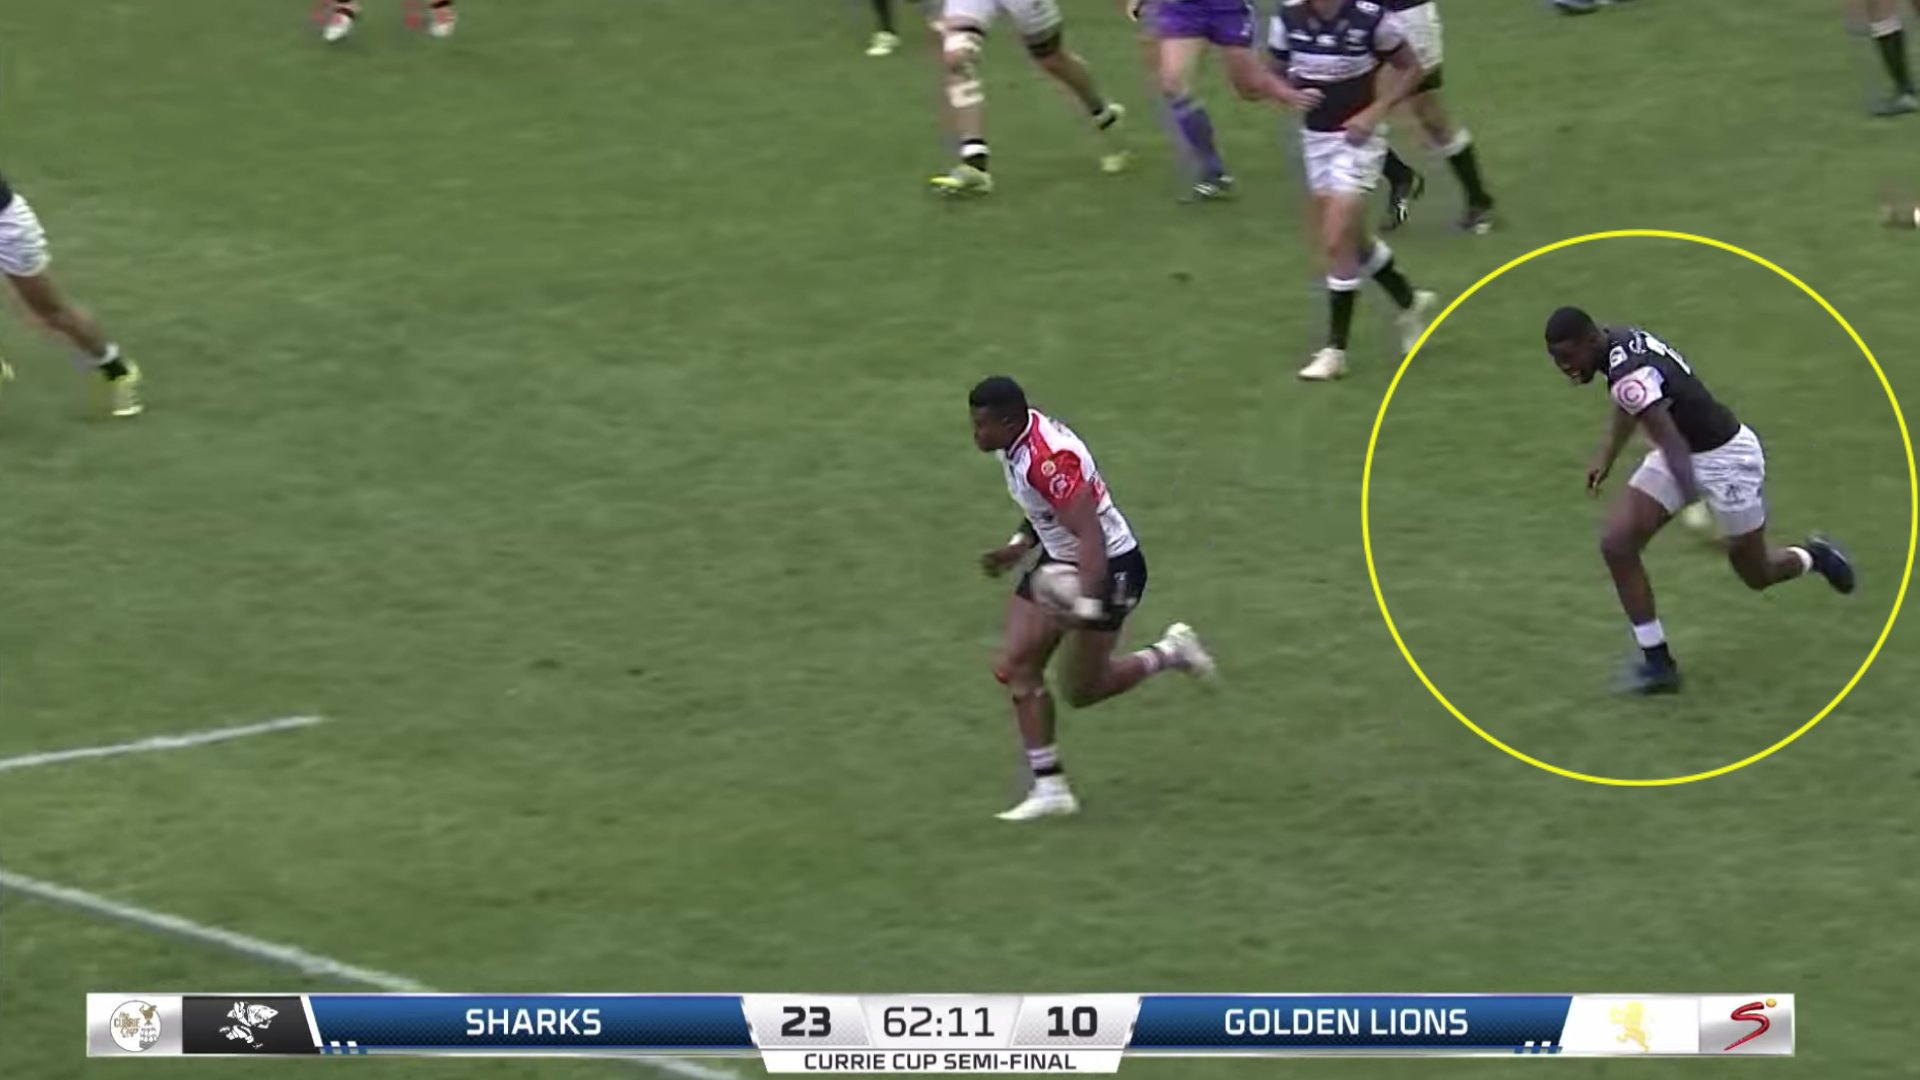 FOOTAGE: 20-year-old shocks rugby world, catching Aphiwe Dyantyi from a 10 metre start